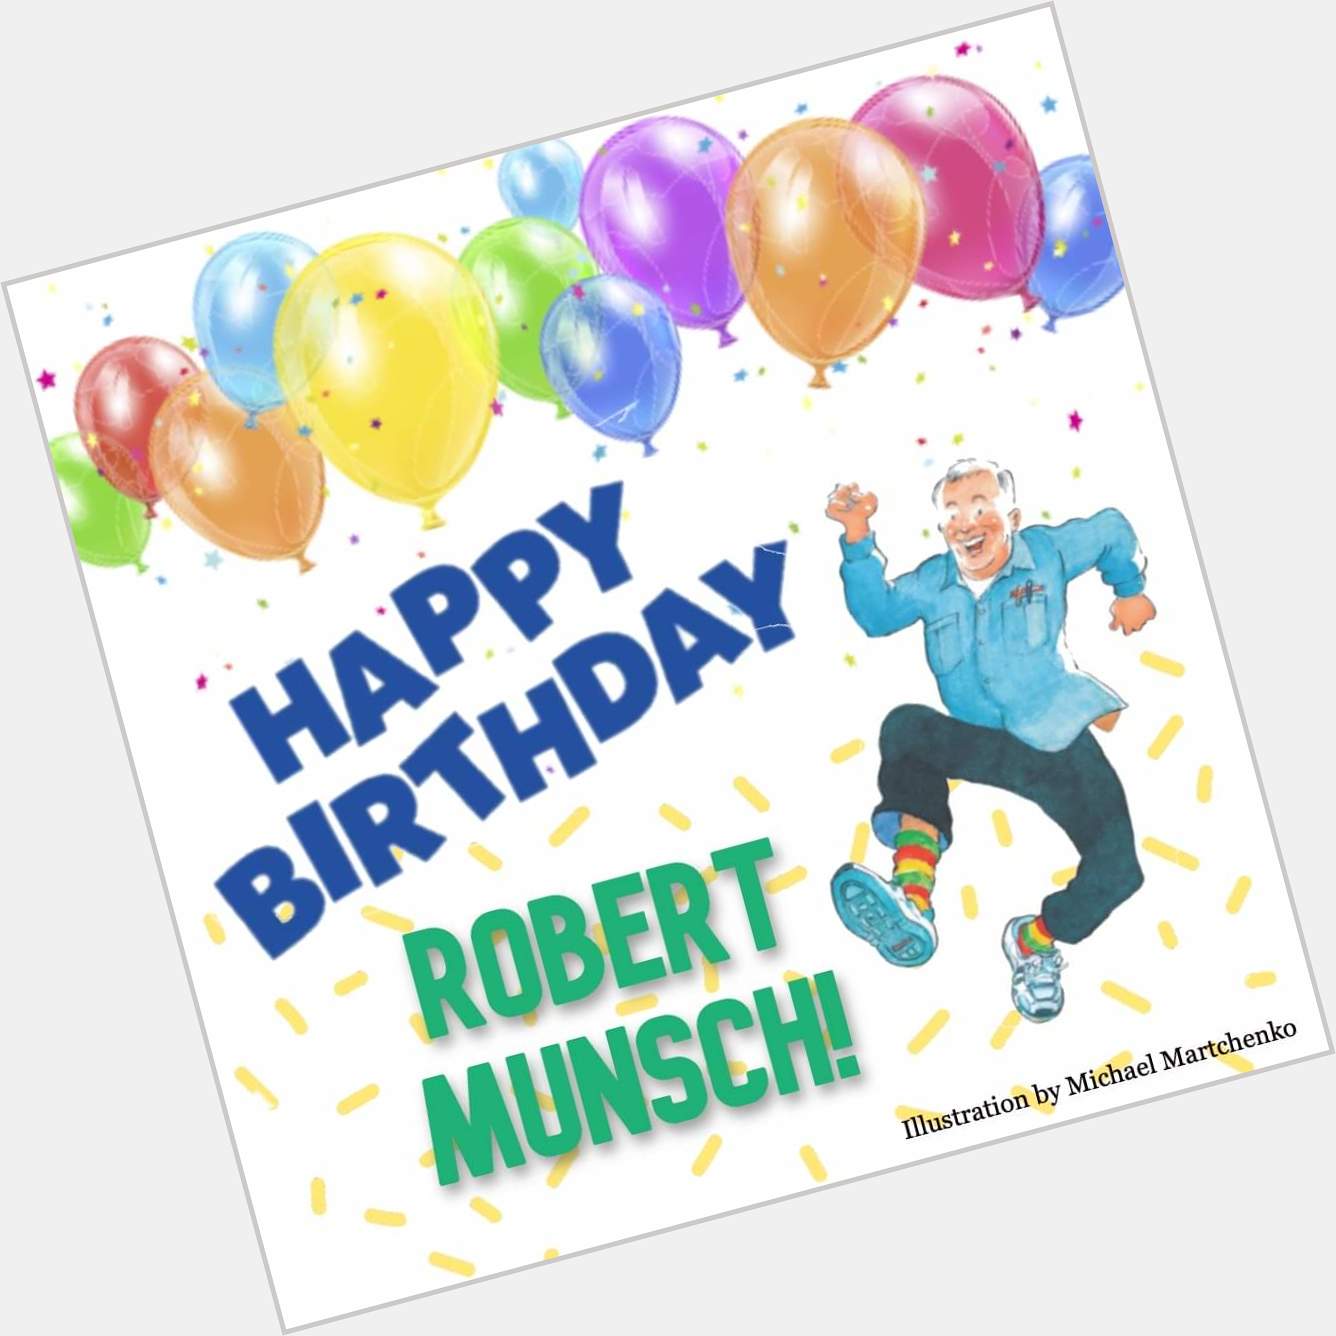 One of my favourite authors is celebrating a birthday today!! Happy birthday Robert Munsch!! 